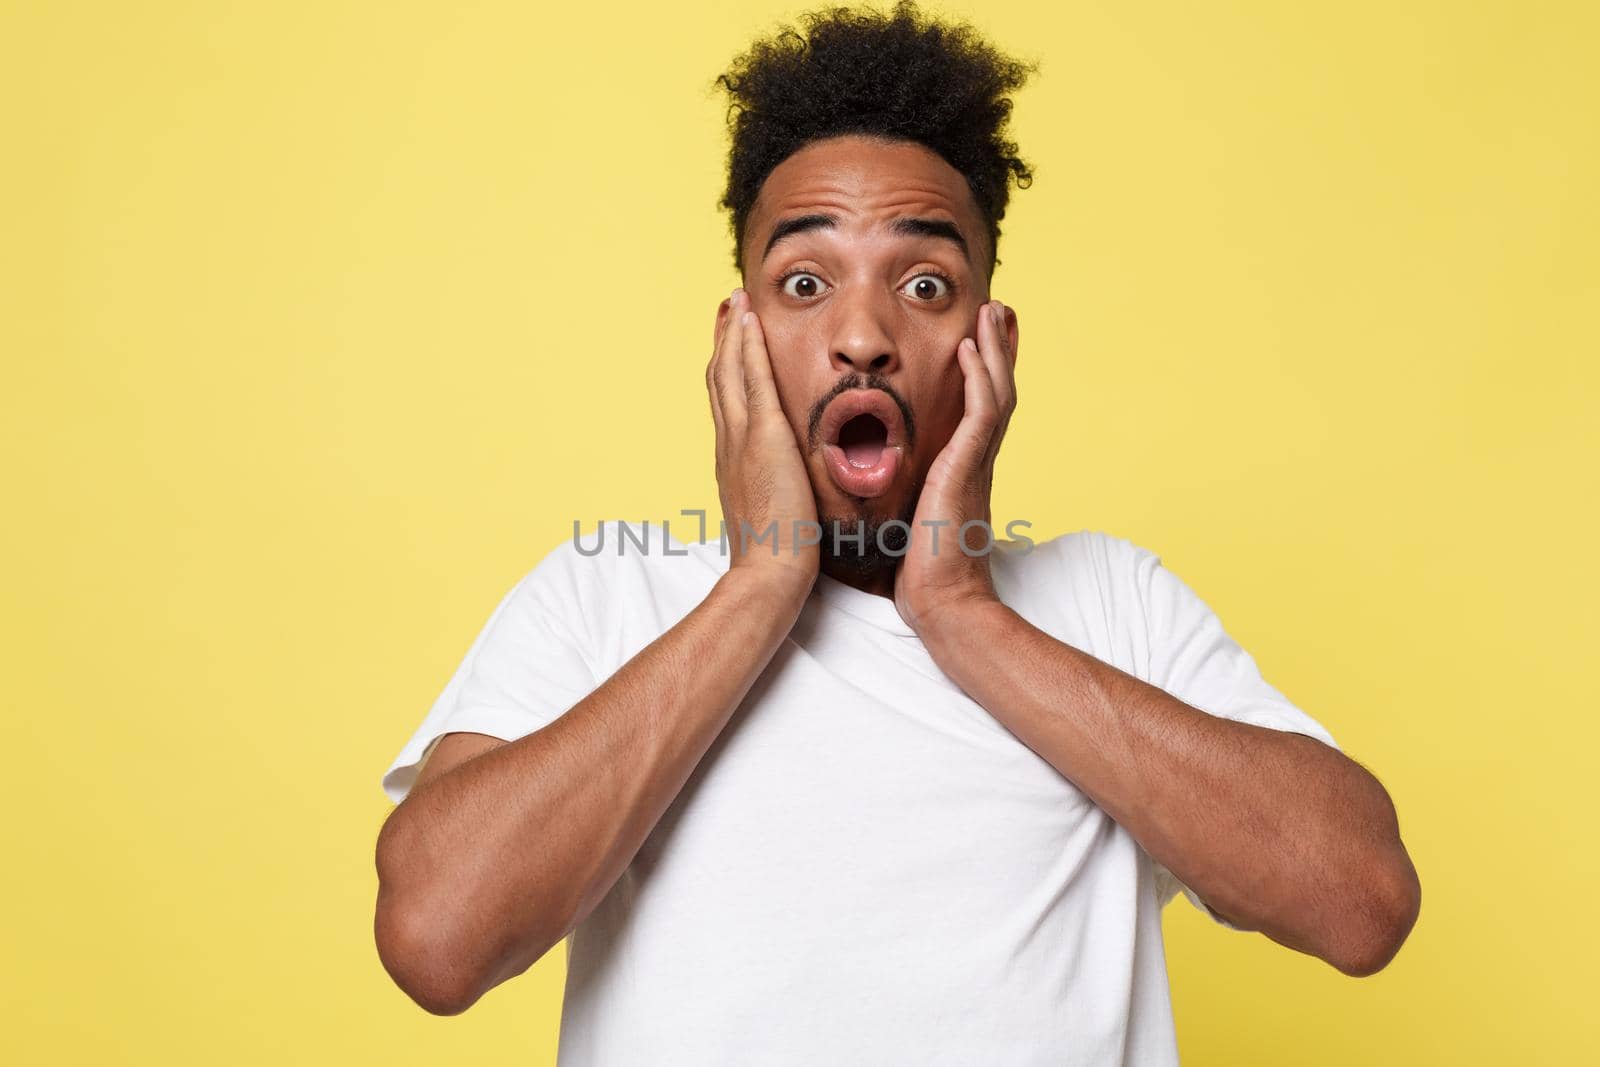 Emotional and People Concept - Portrait of excited young African American man screaming in shock and amazement holding hands on head